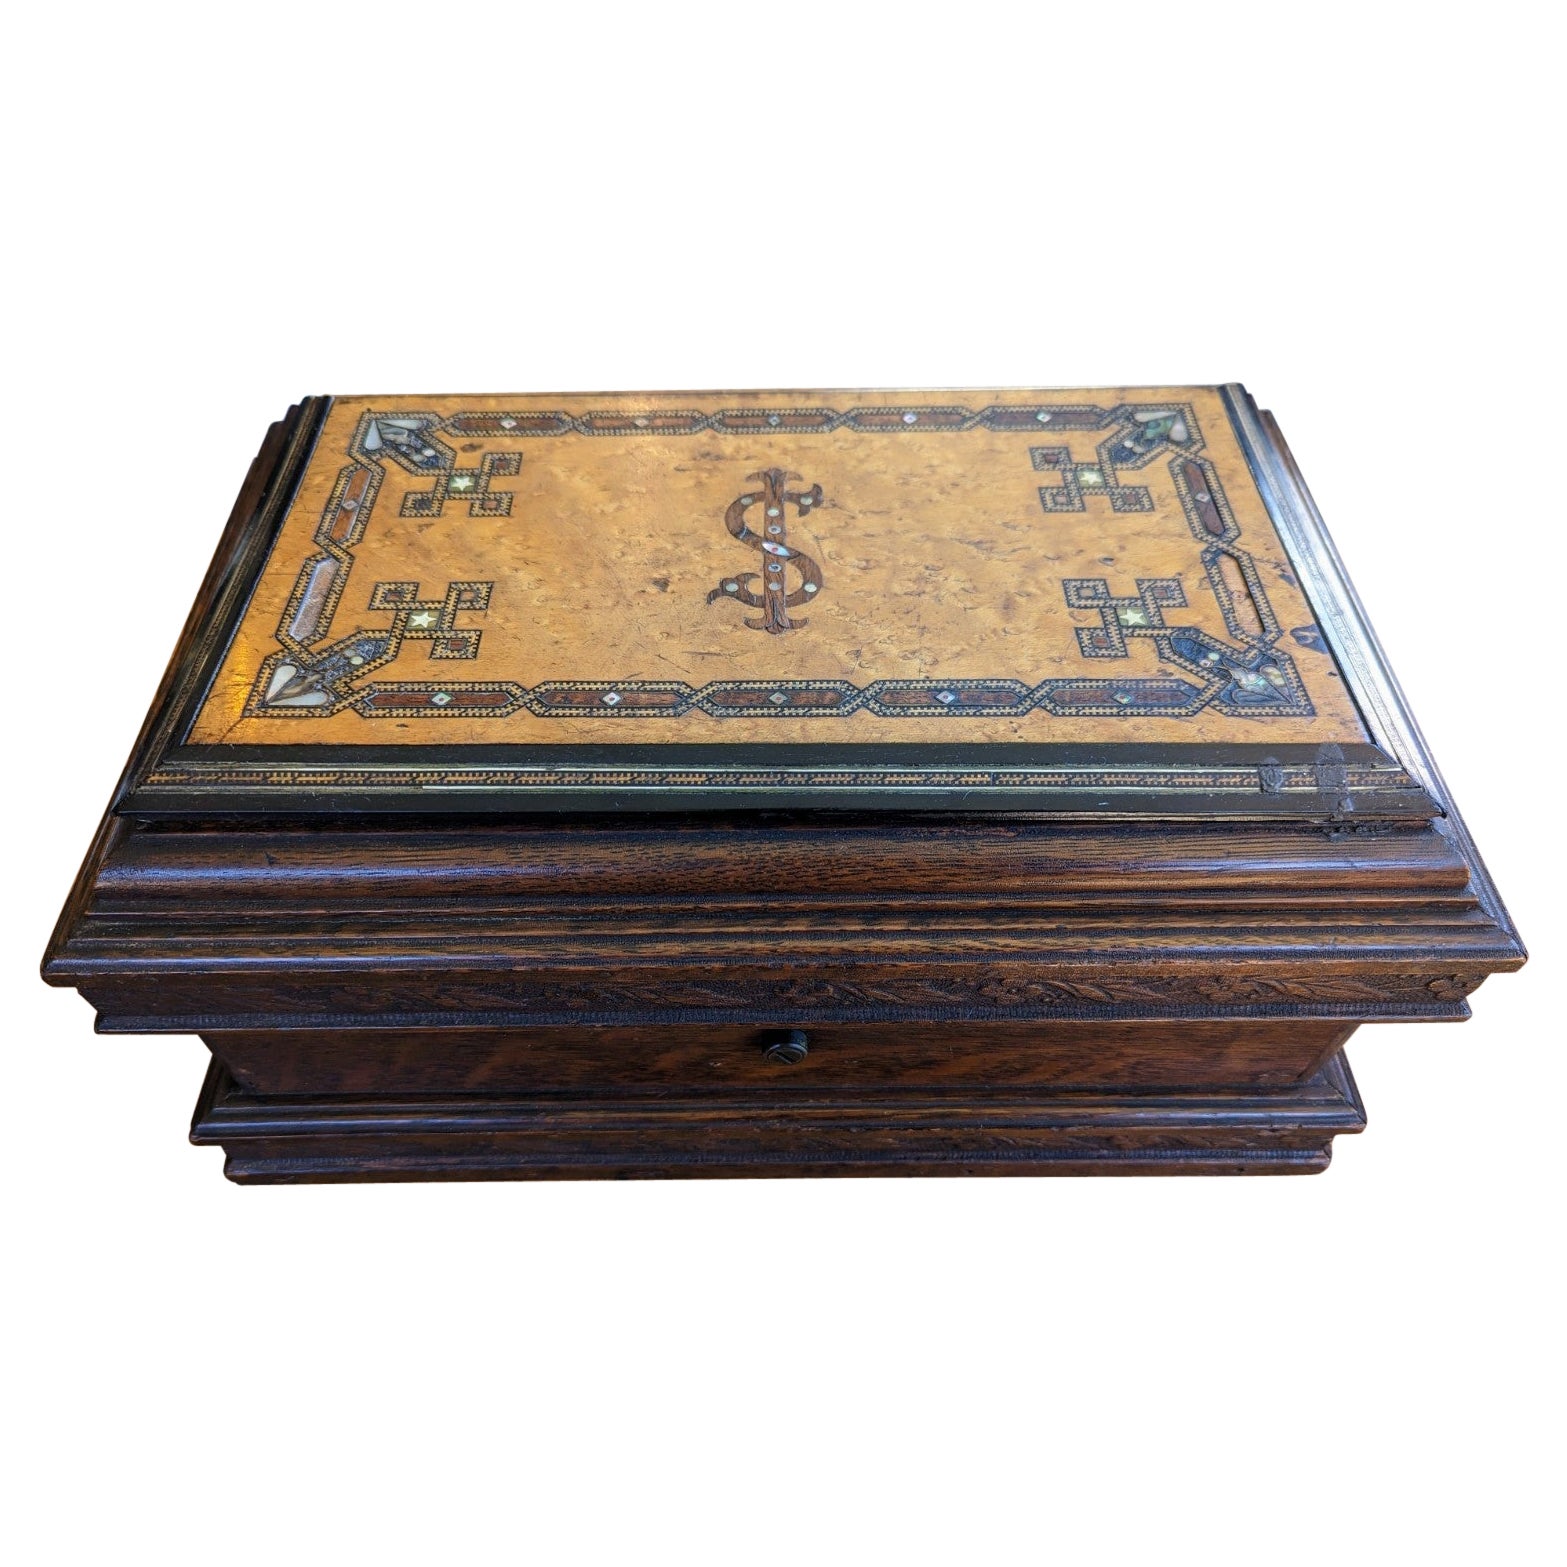 Vintage to Antique Wood Box with Hidden Compartments Marquetry Inlay MOP